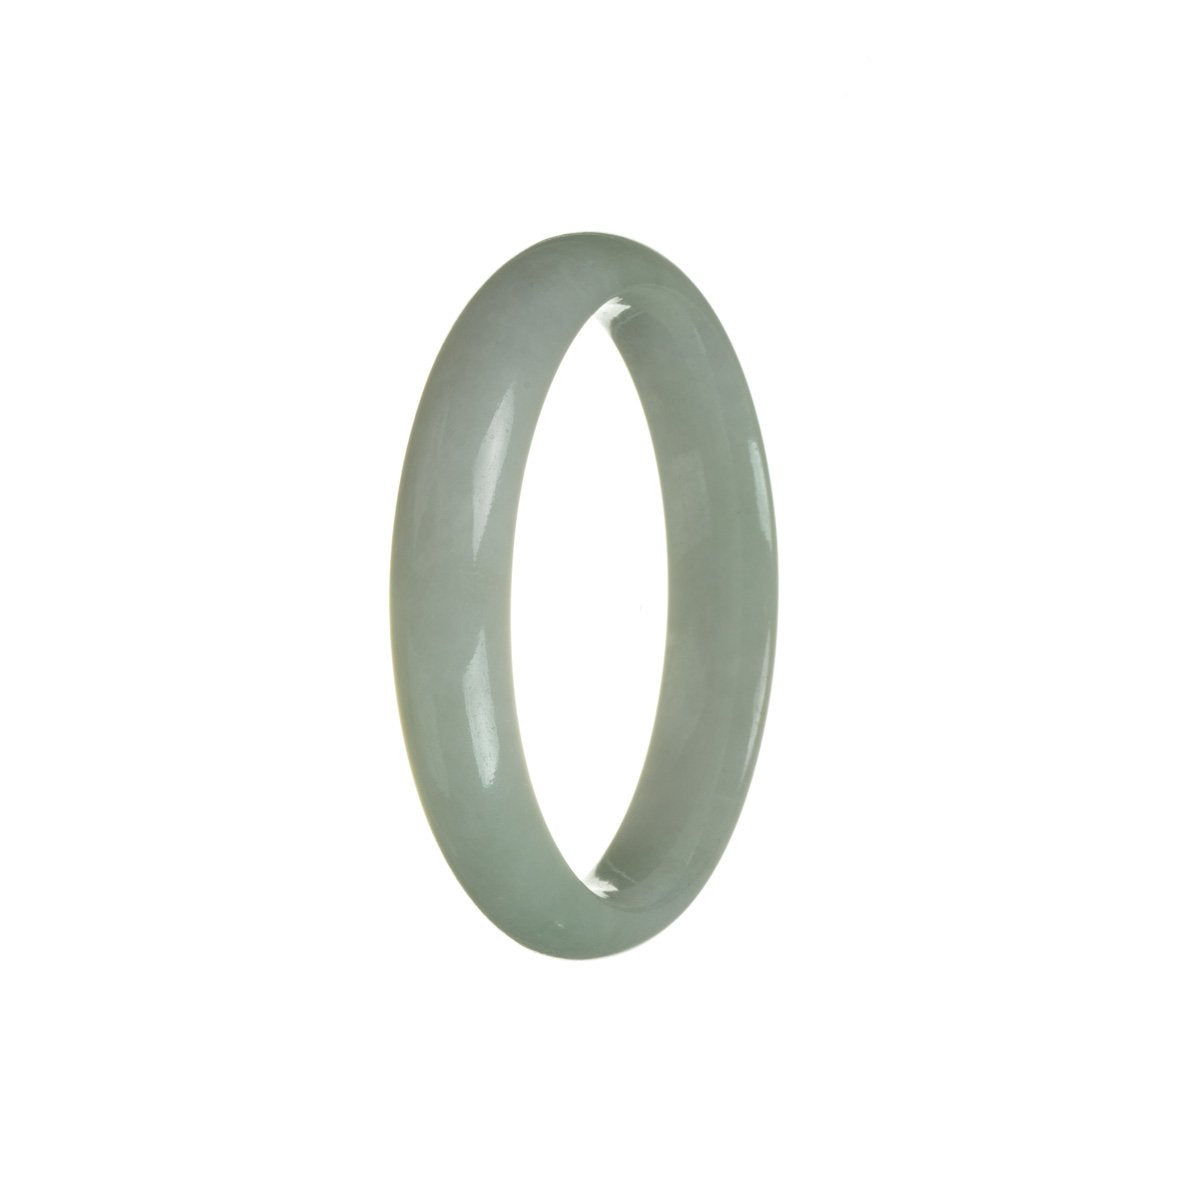 A close-up of a beautiful genuine Type A White with Pale Green Jadeite Bangle, shaped like a half moon, with a diameter of 56mm.